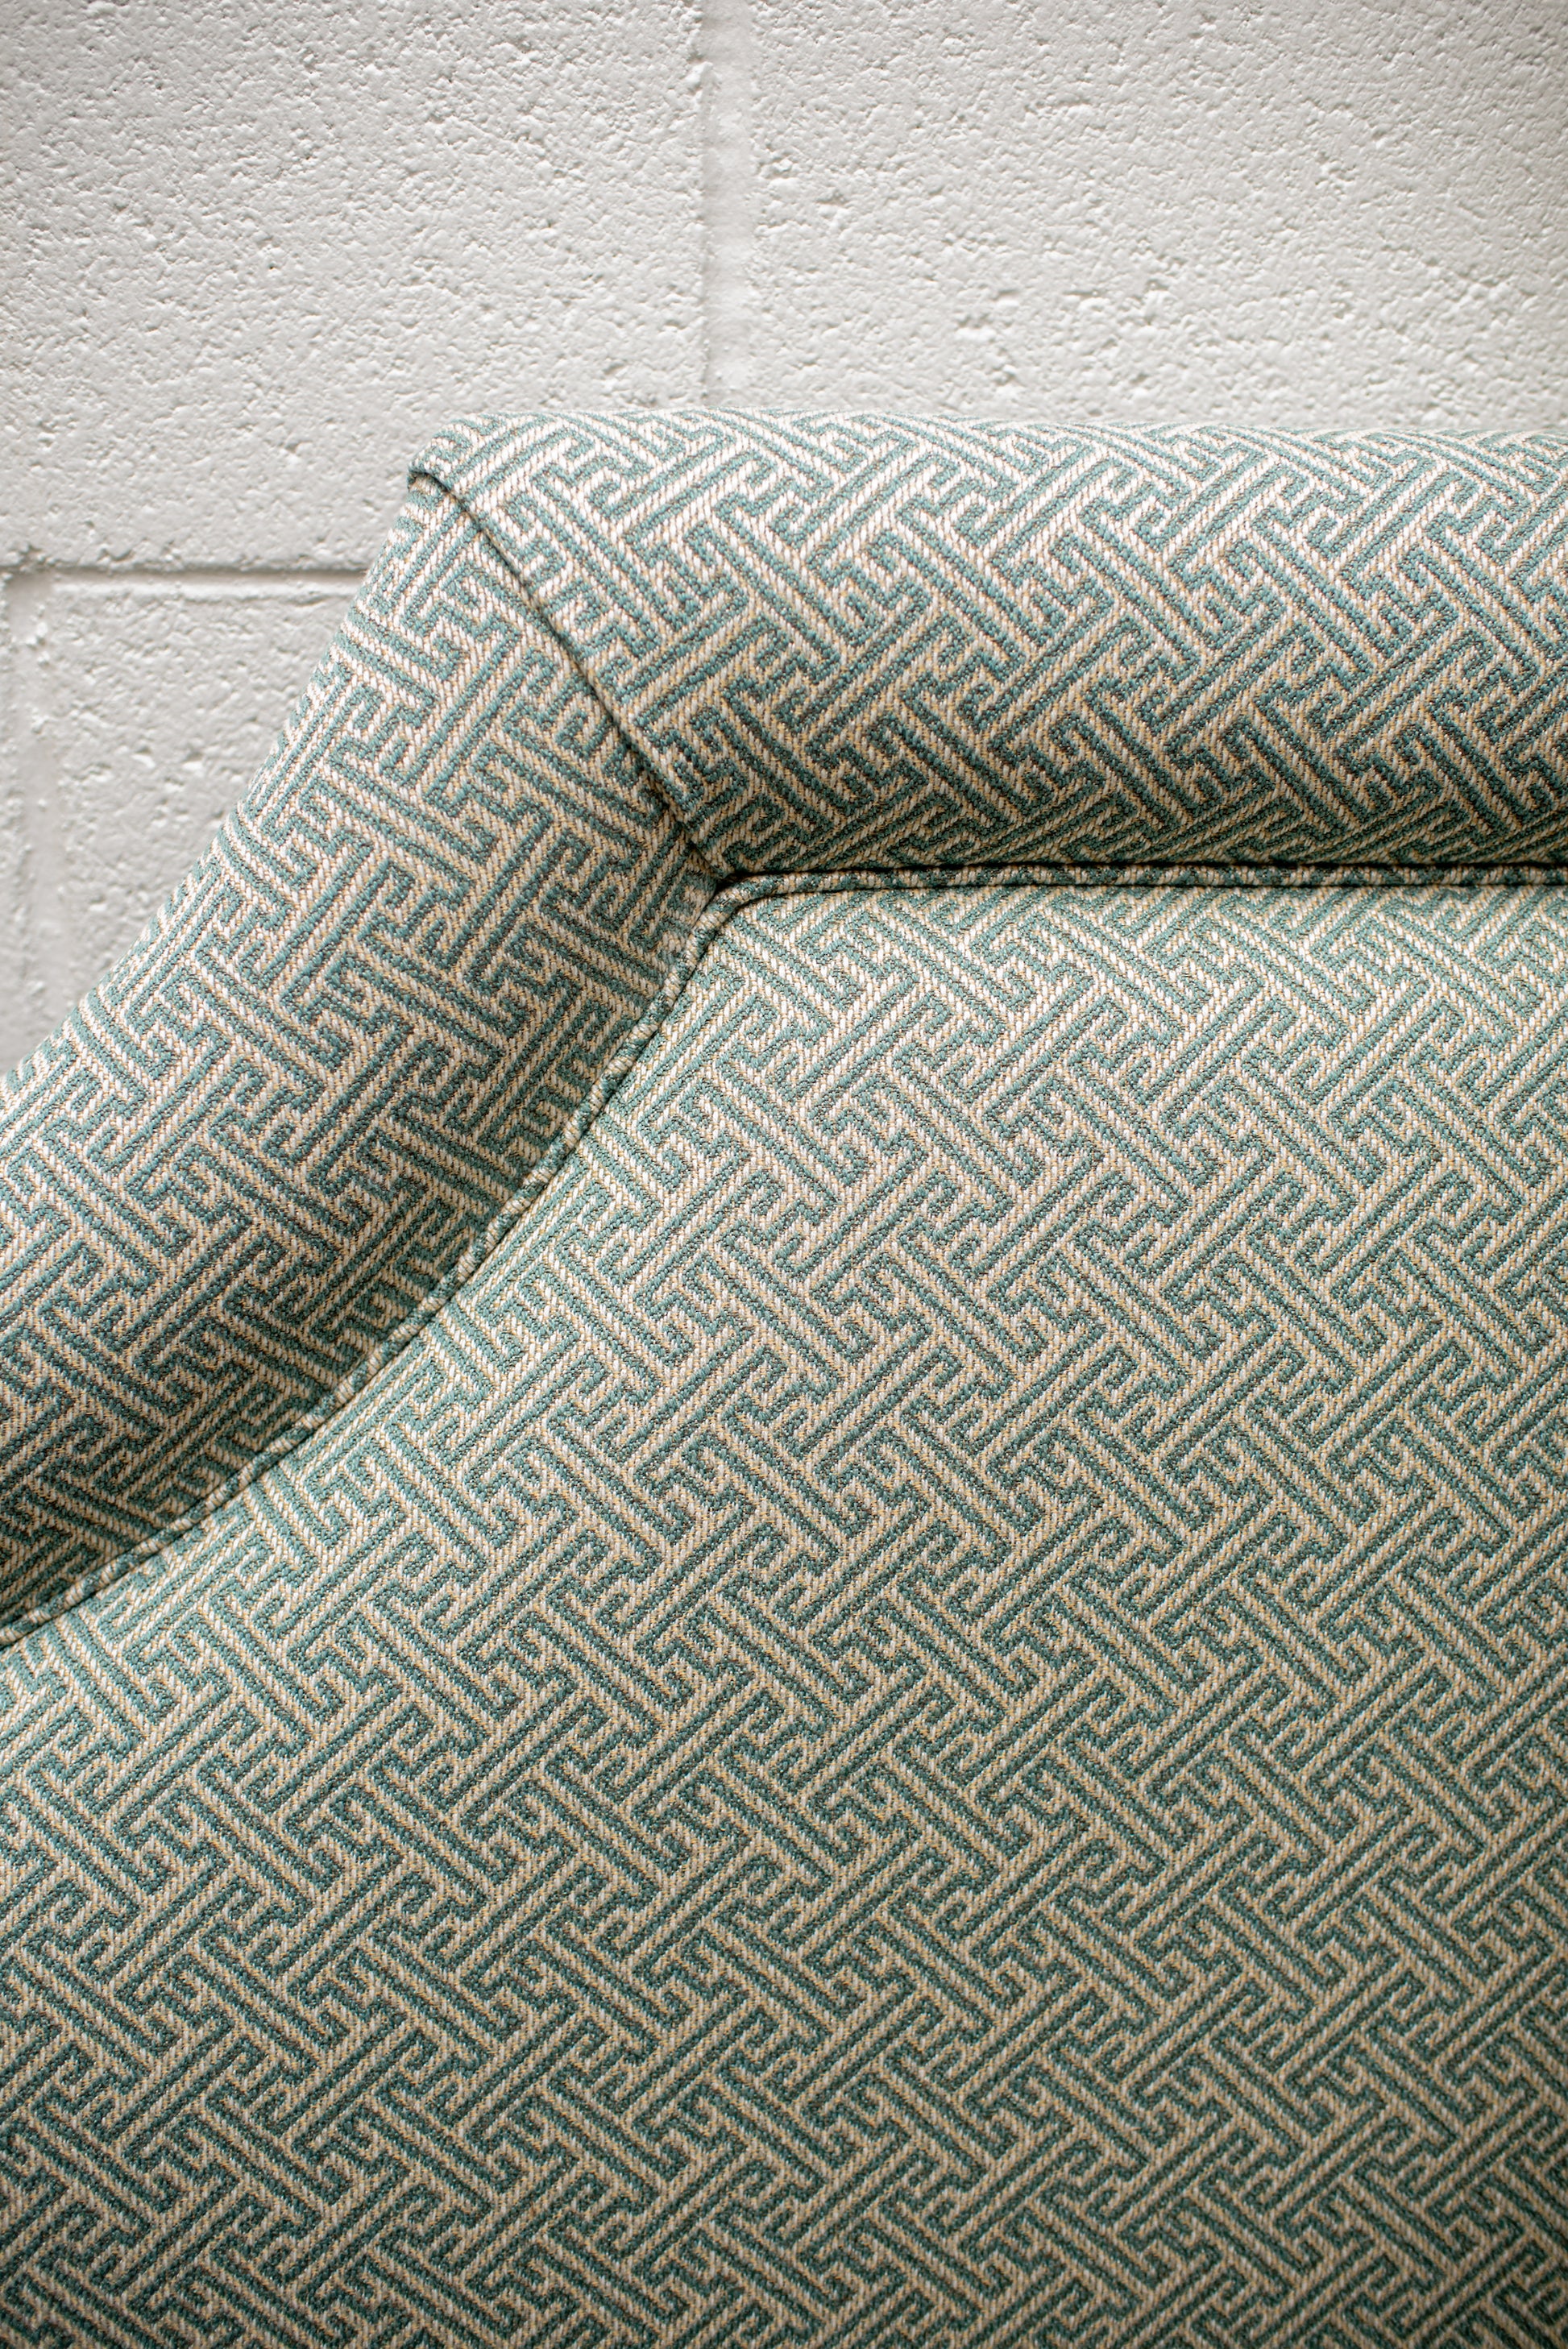 Queen upholstered headboard in green and cream Kravet Fabric by Winston's Collection